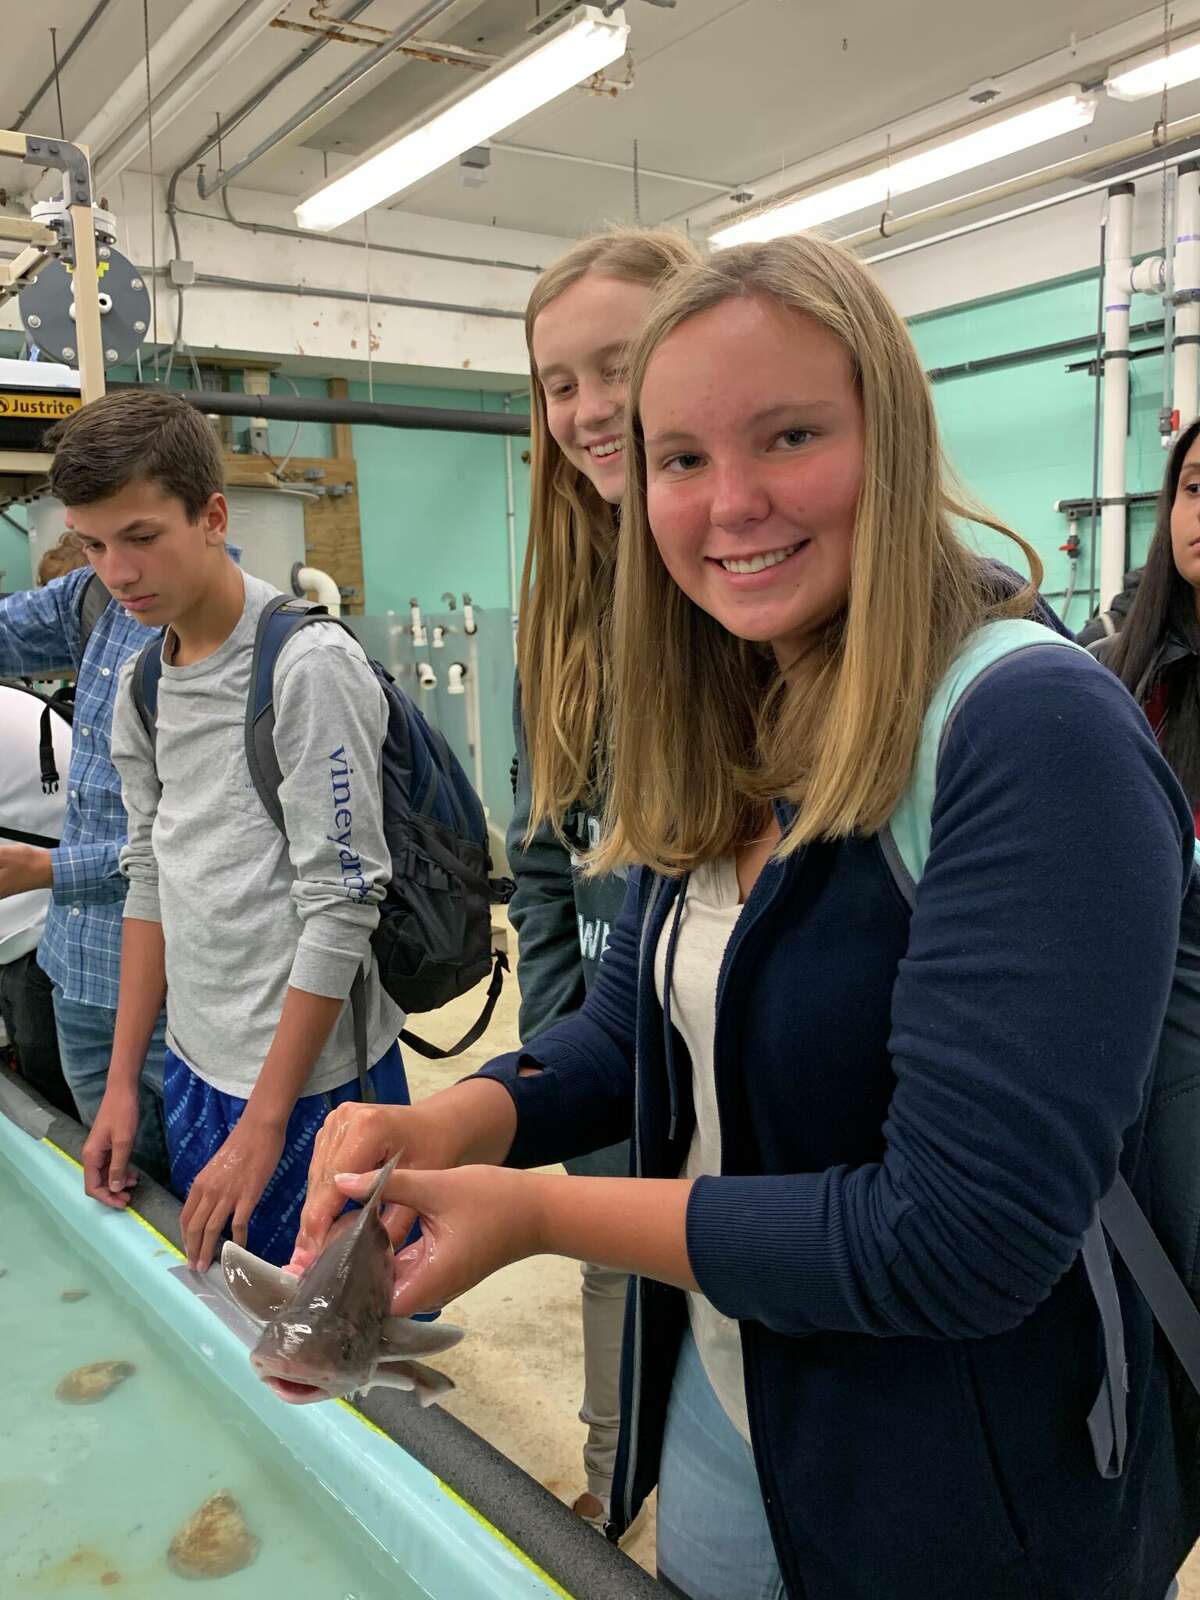 Norwalk Public Schools students participate in the existing Marine Science Academy partnership between the school district and the aquarium, which has now been funded to expand.